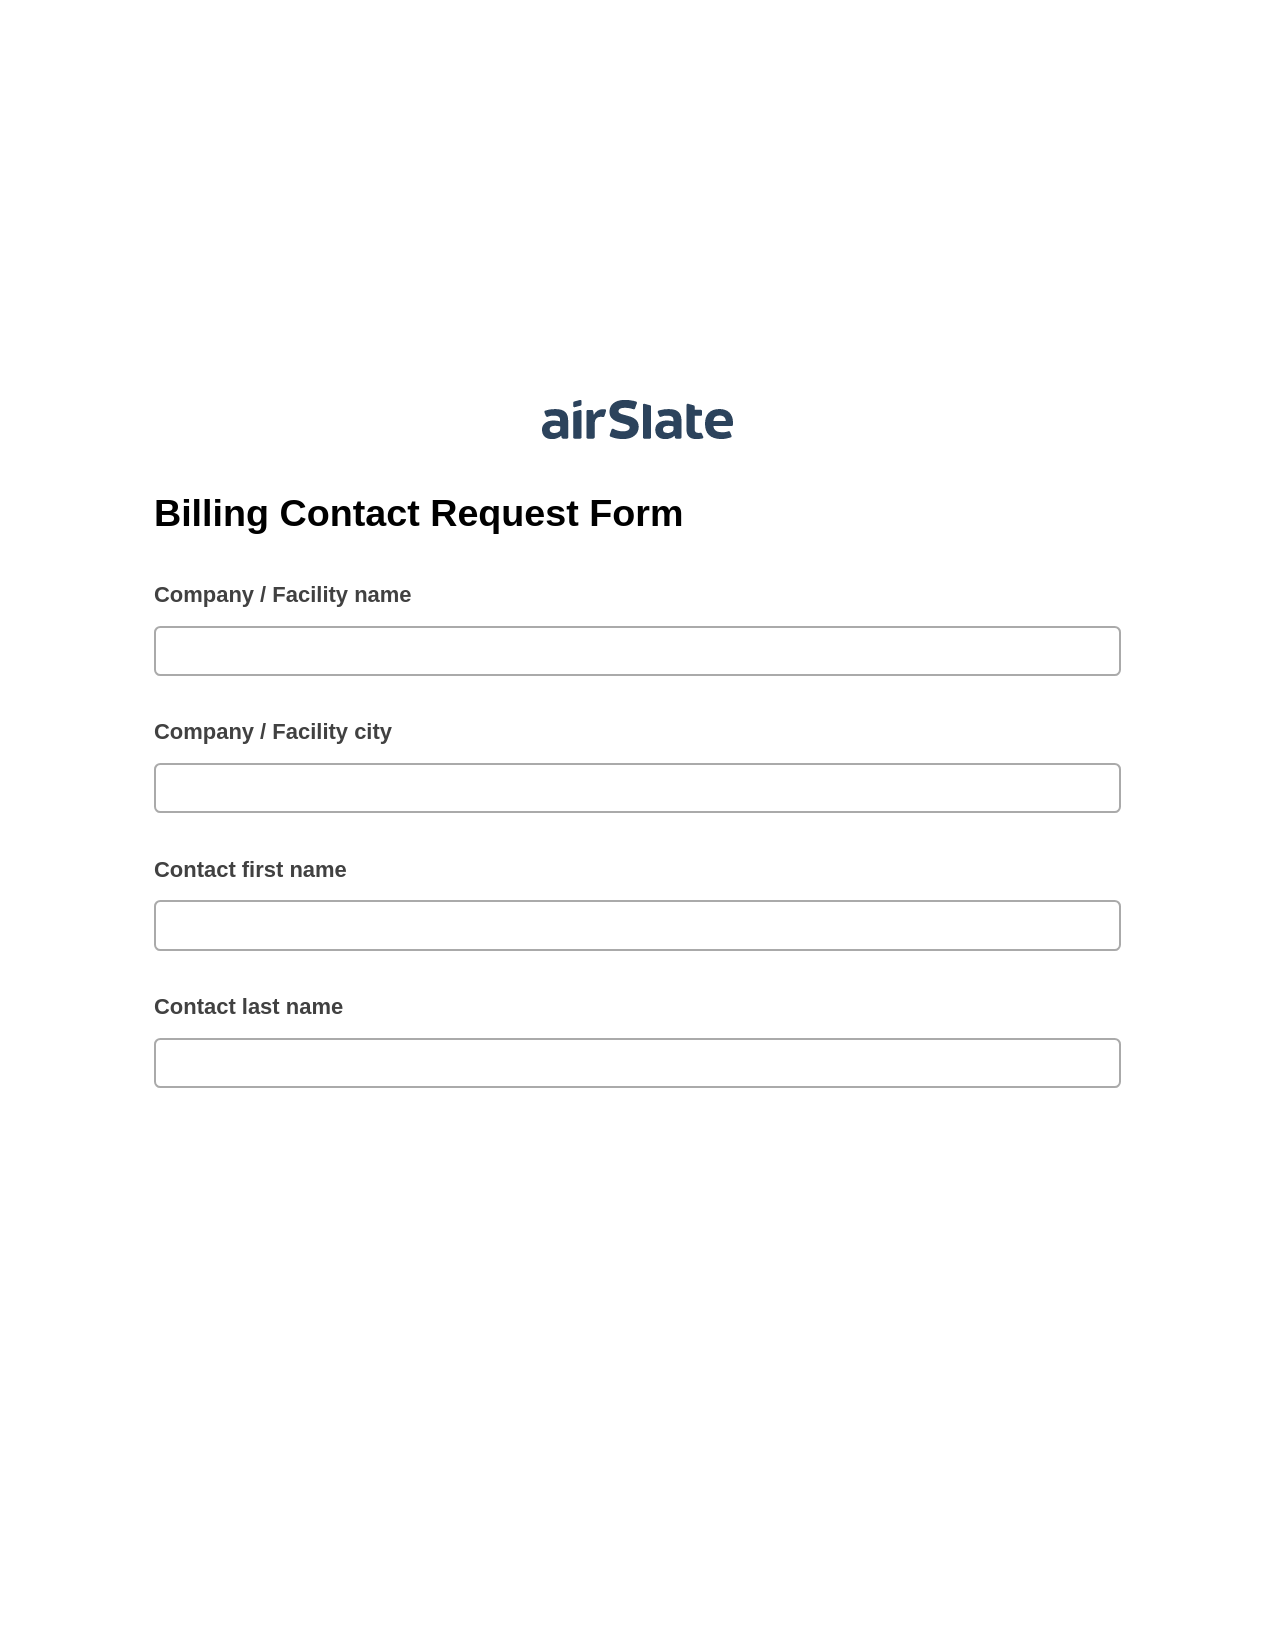 Billing Contact Request Form Pre-fill Dropdowns from CSV File Bot, Create MS Dynamics 365 Records Bot, Export to MySQL Bot